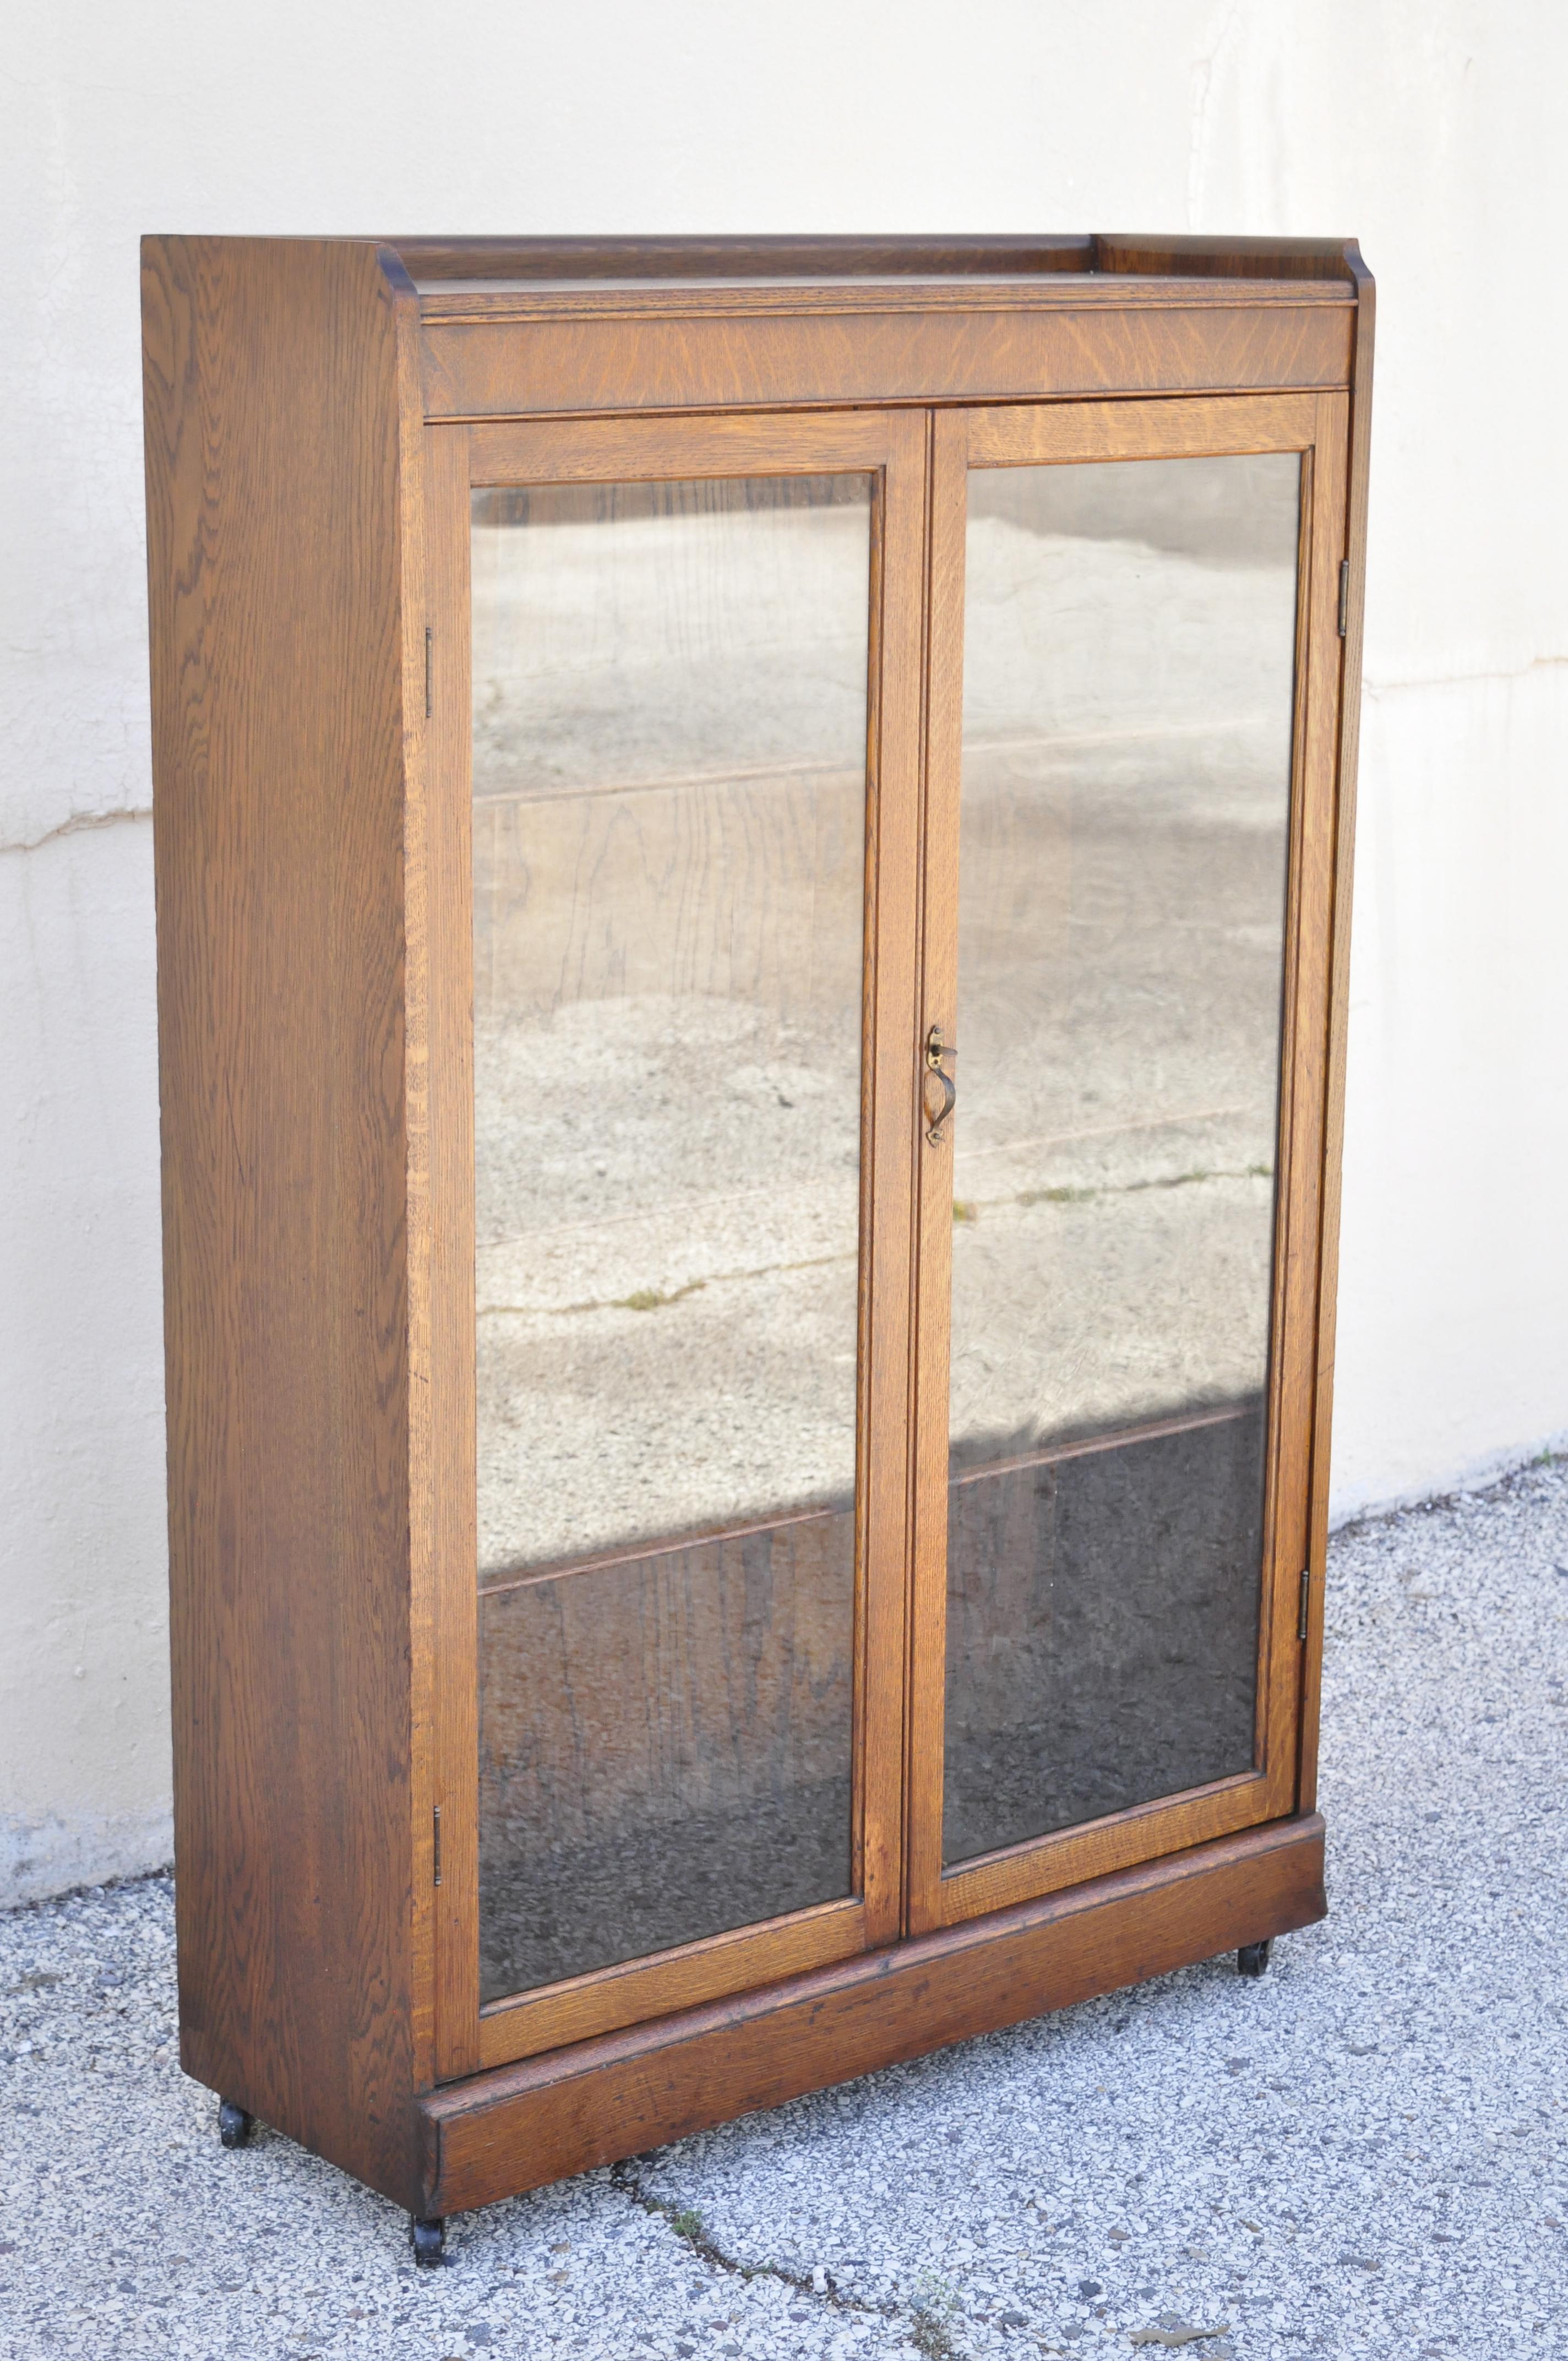 Antique Victorian Mission oak glass two door small bookcase curio cabinet. Item features beautiful wood grain, 2 glass swing doors, original label remnants, 4 wooden shelves, very nice antique item, quality American craftsmanship, great style and